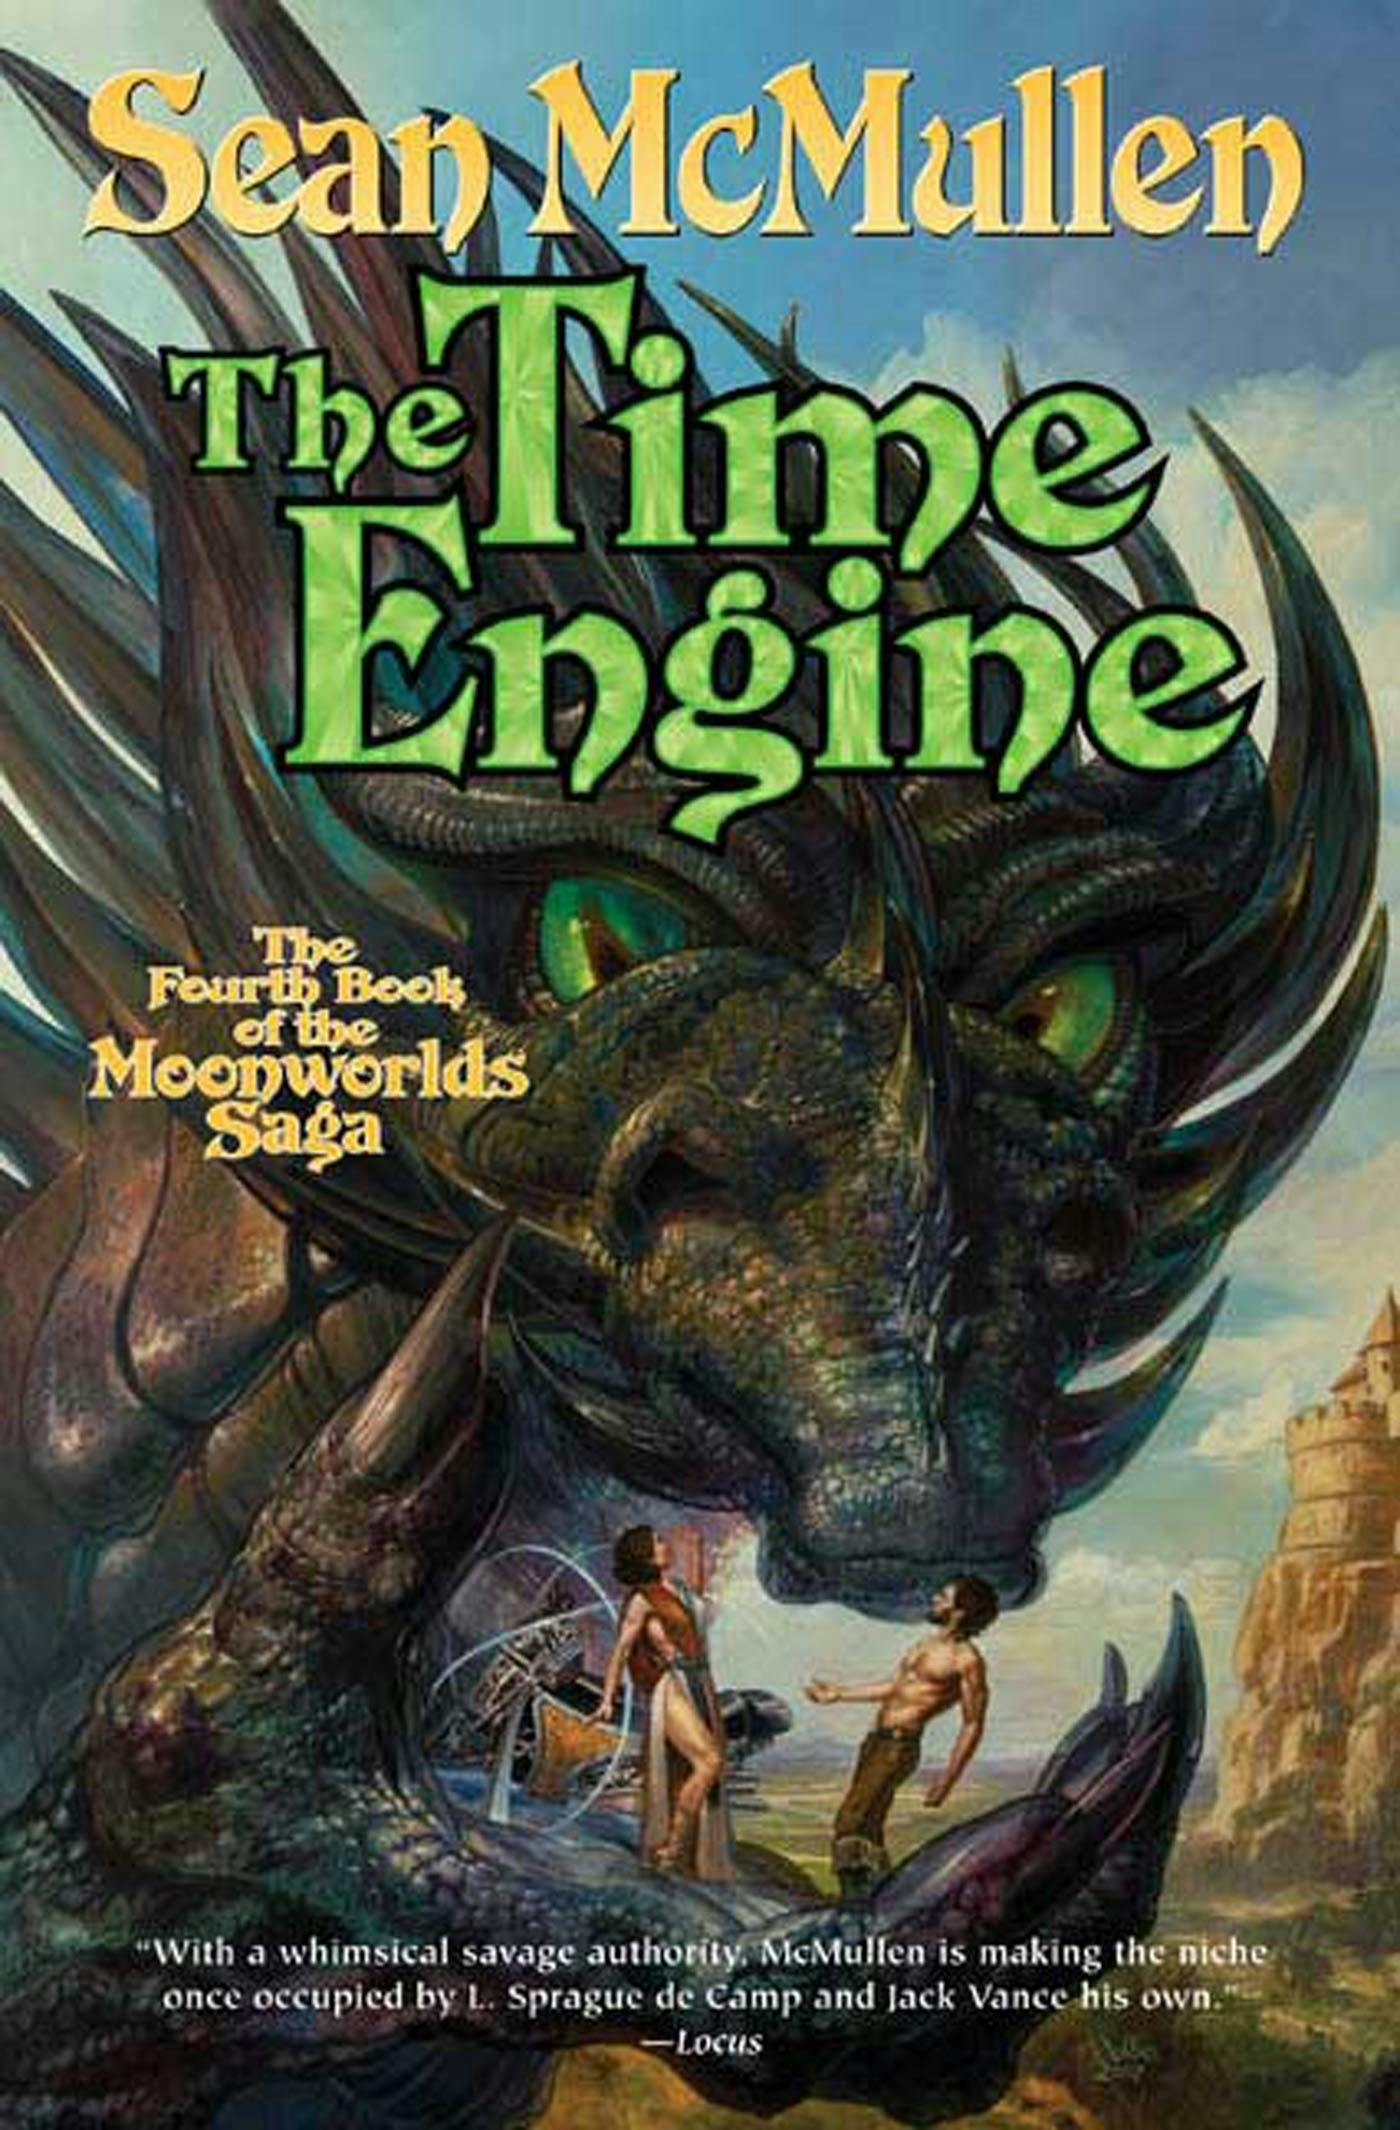 Cover for the book titled as: The Time Engine